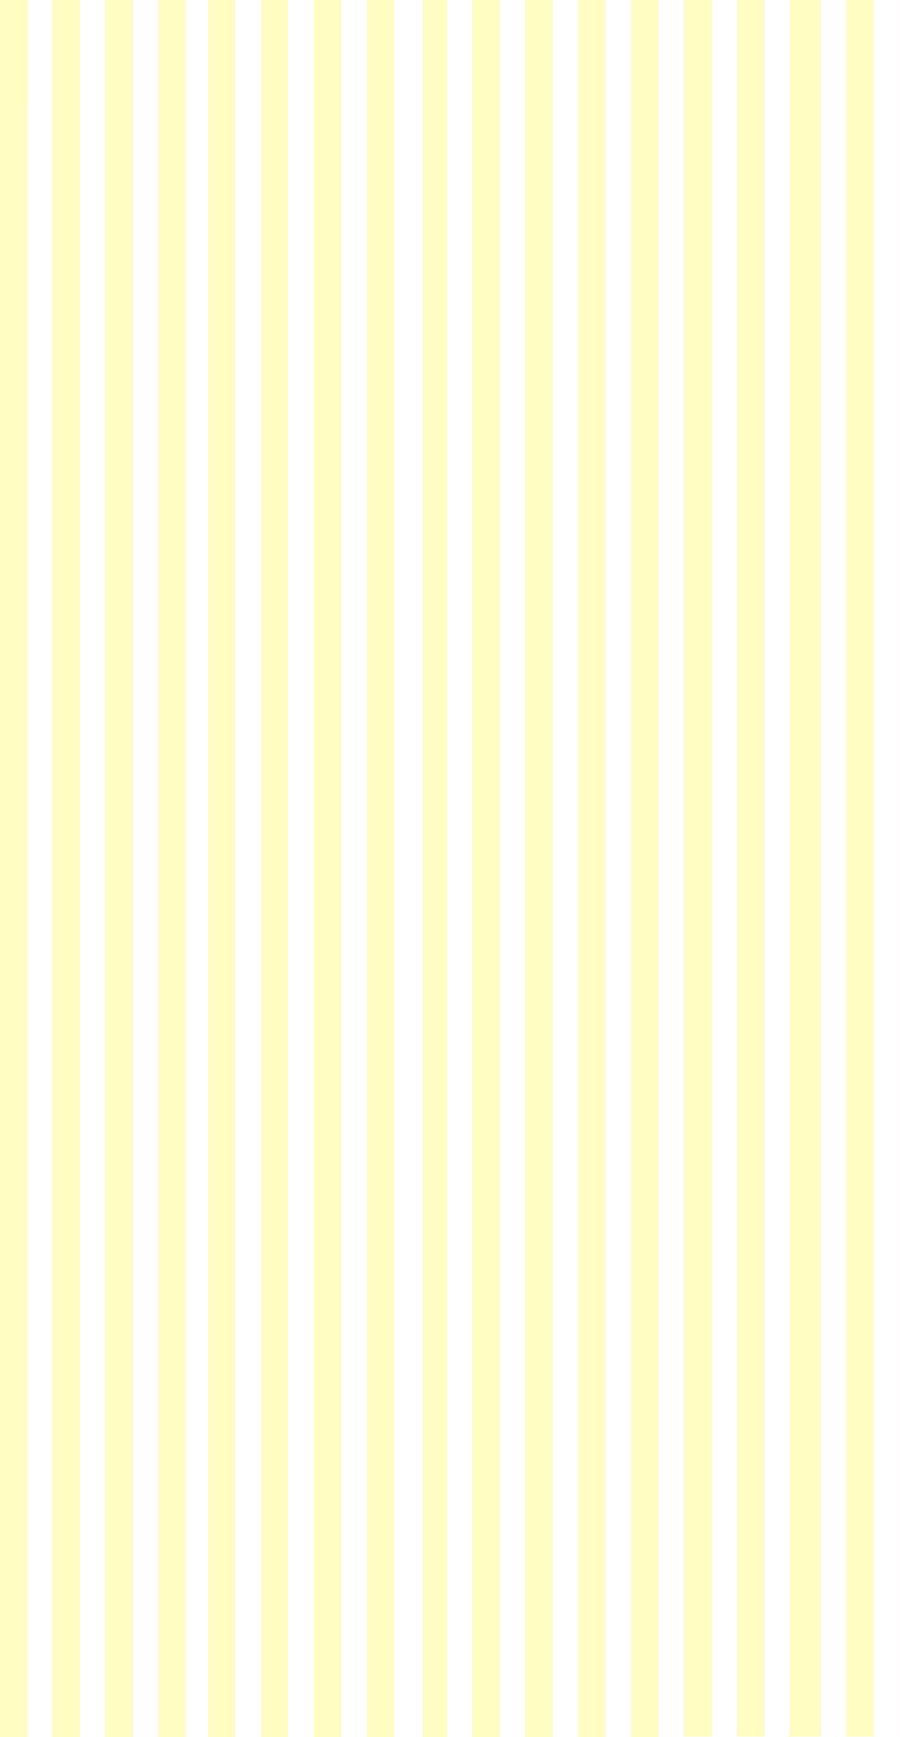 A yellow and white striped wallpaper - Light yellow